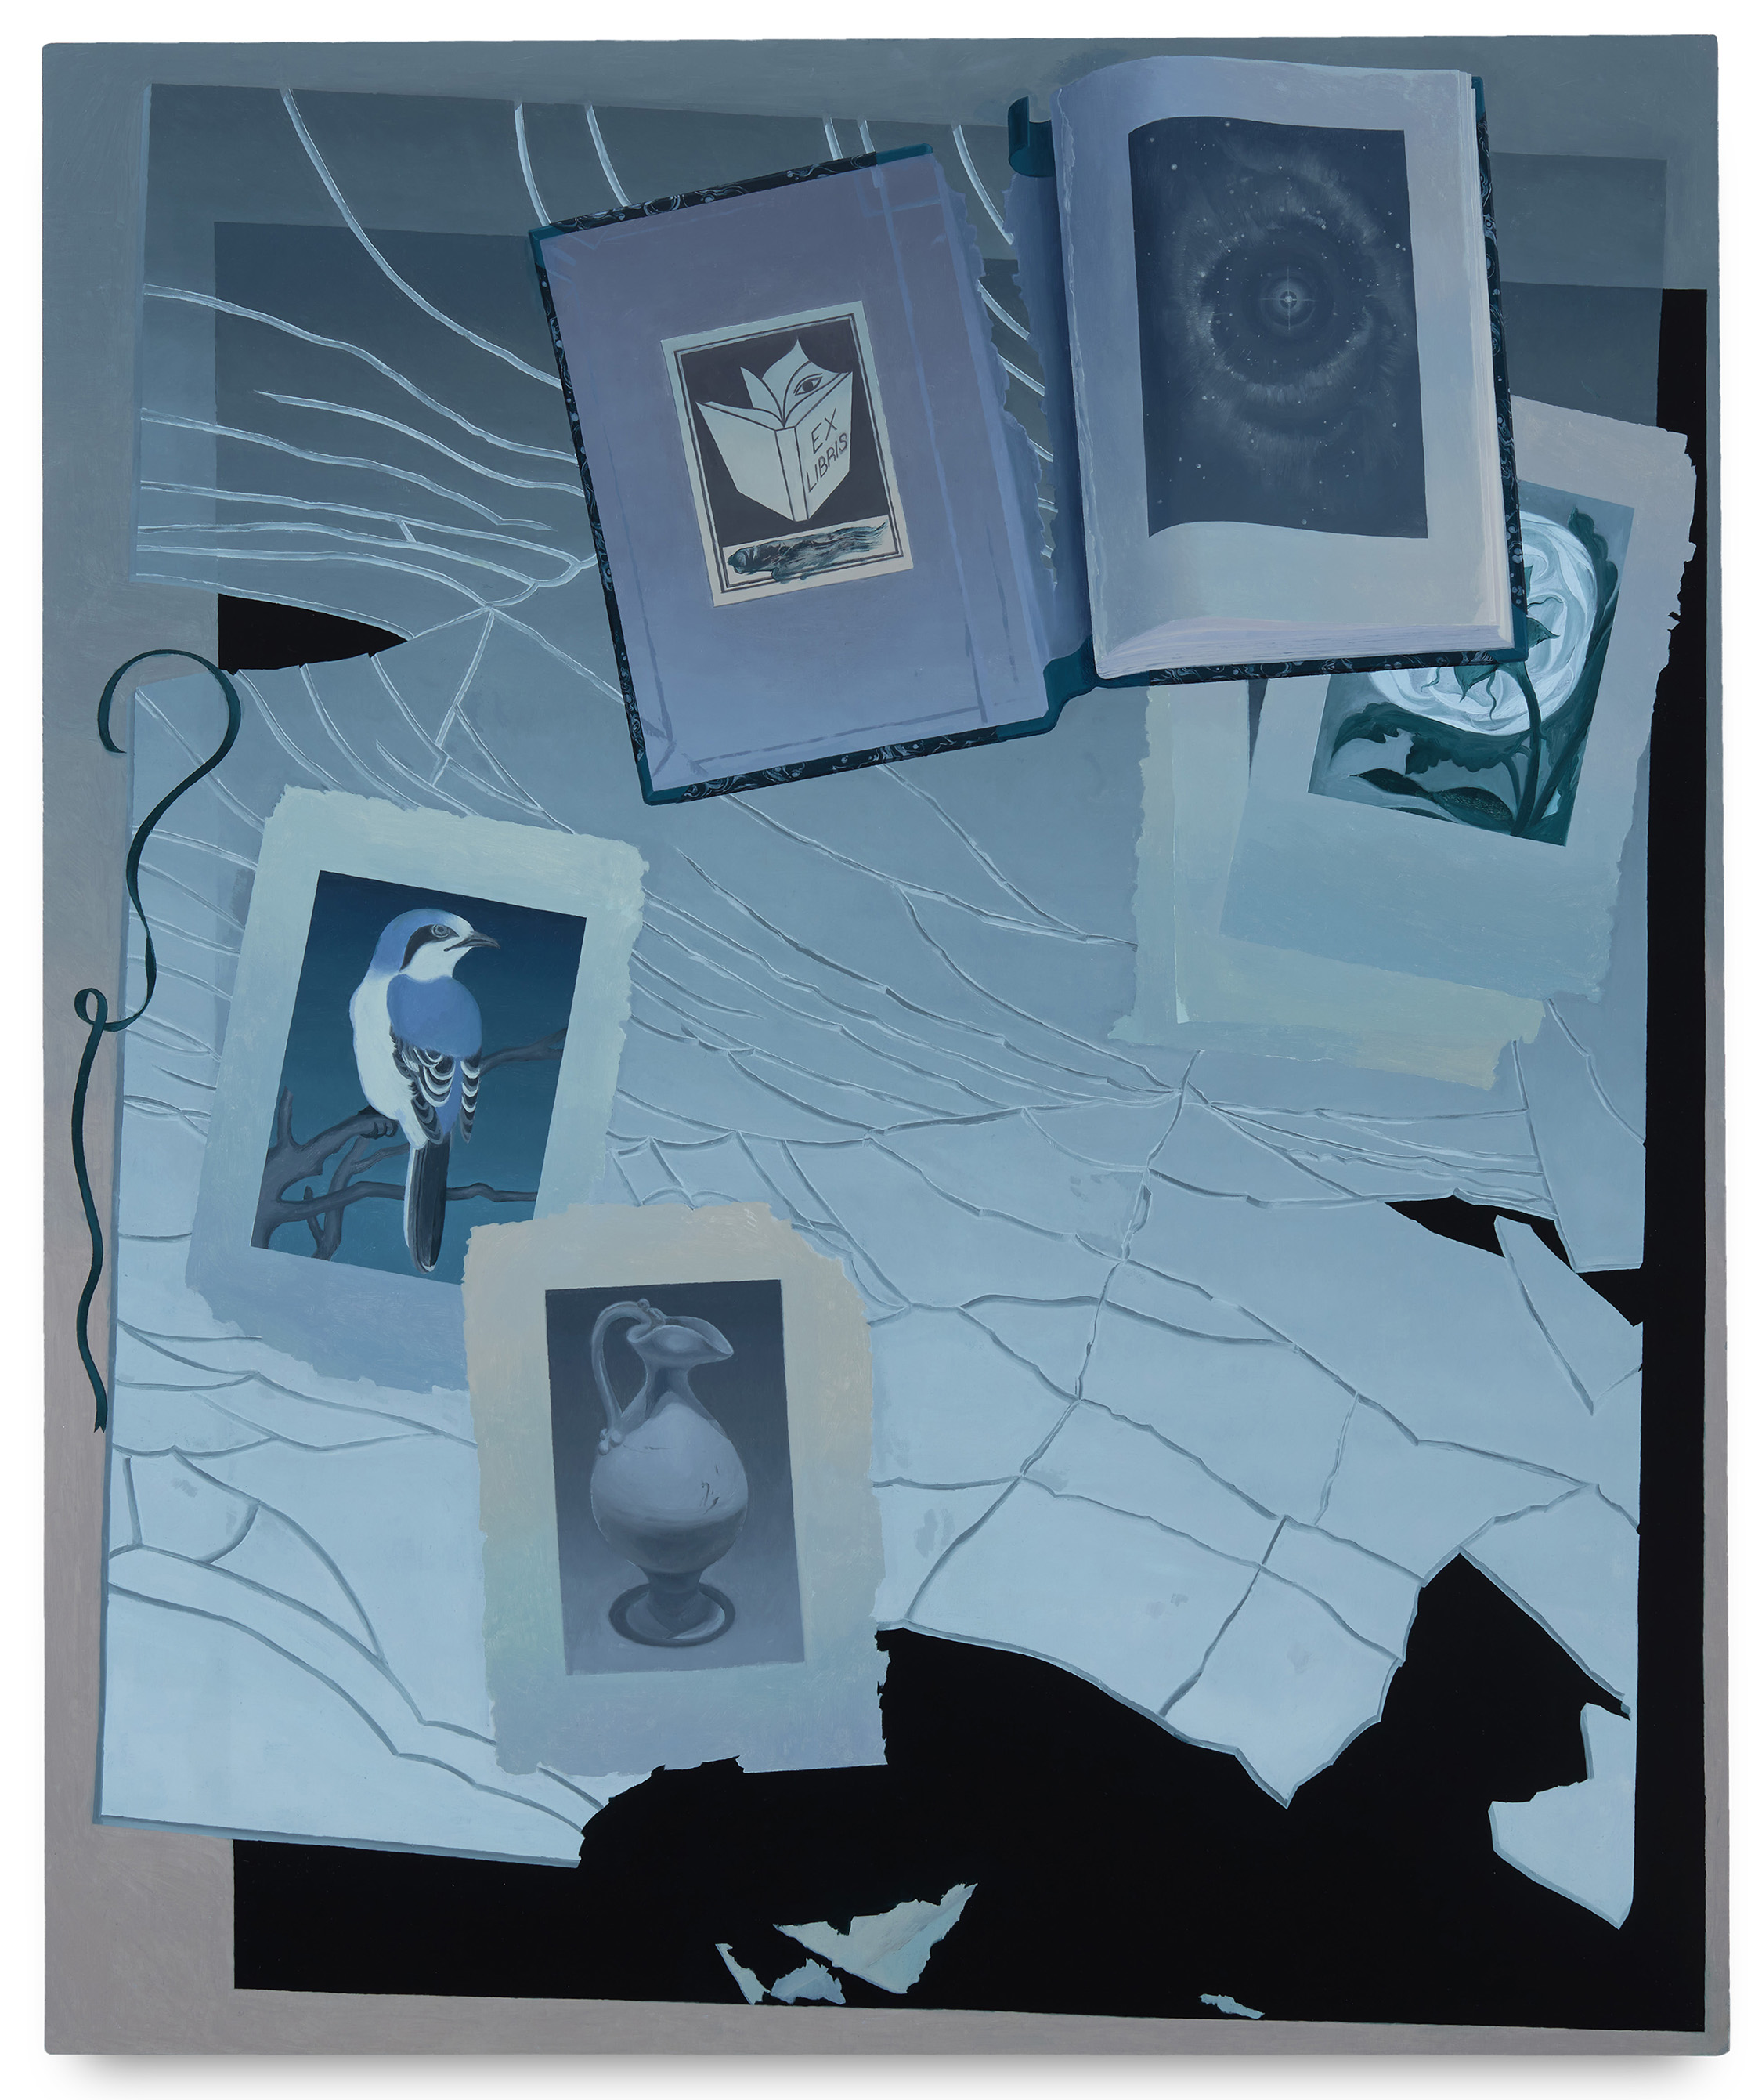 painting by olivia jia, depicting photos of a vase, a bird, a galaxy, a moonlit flower on torn-out book pages laid on a shattered pane of glass. the image is a dusky blue near-monochrome. 